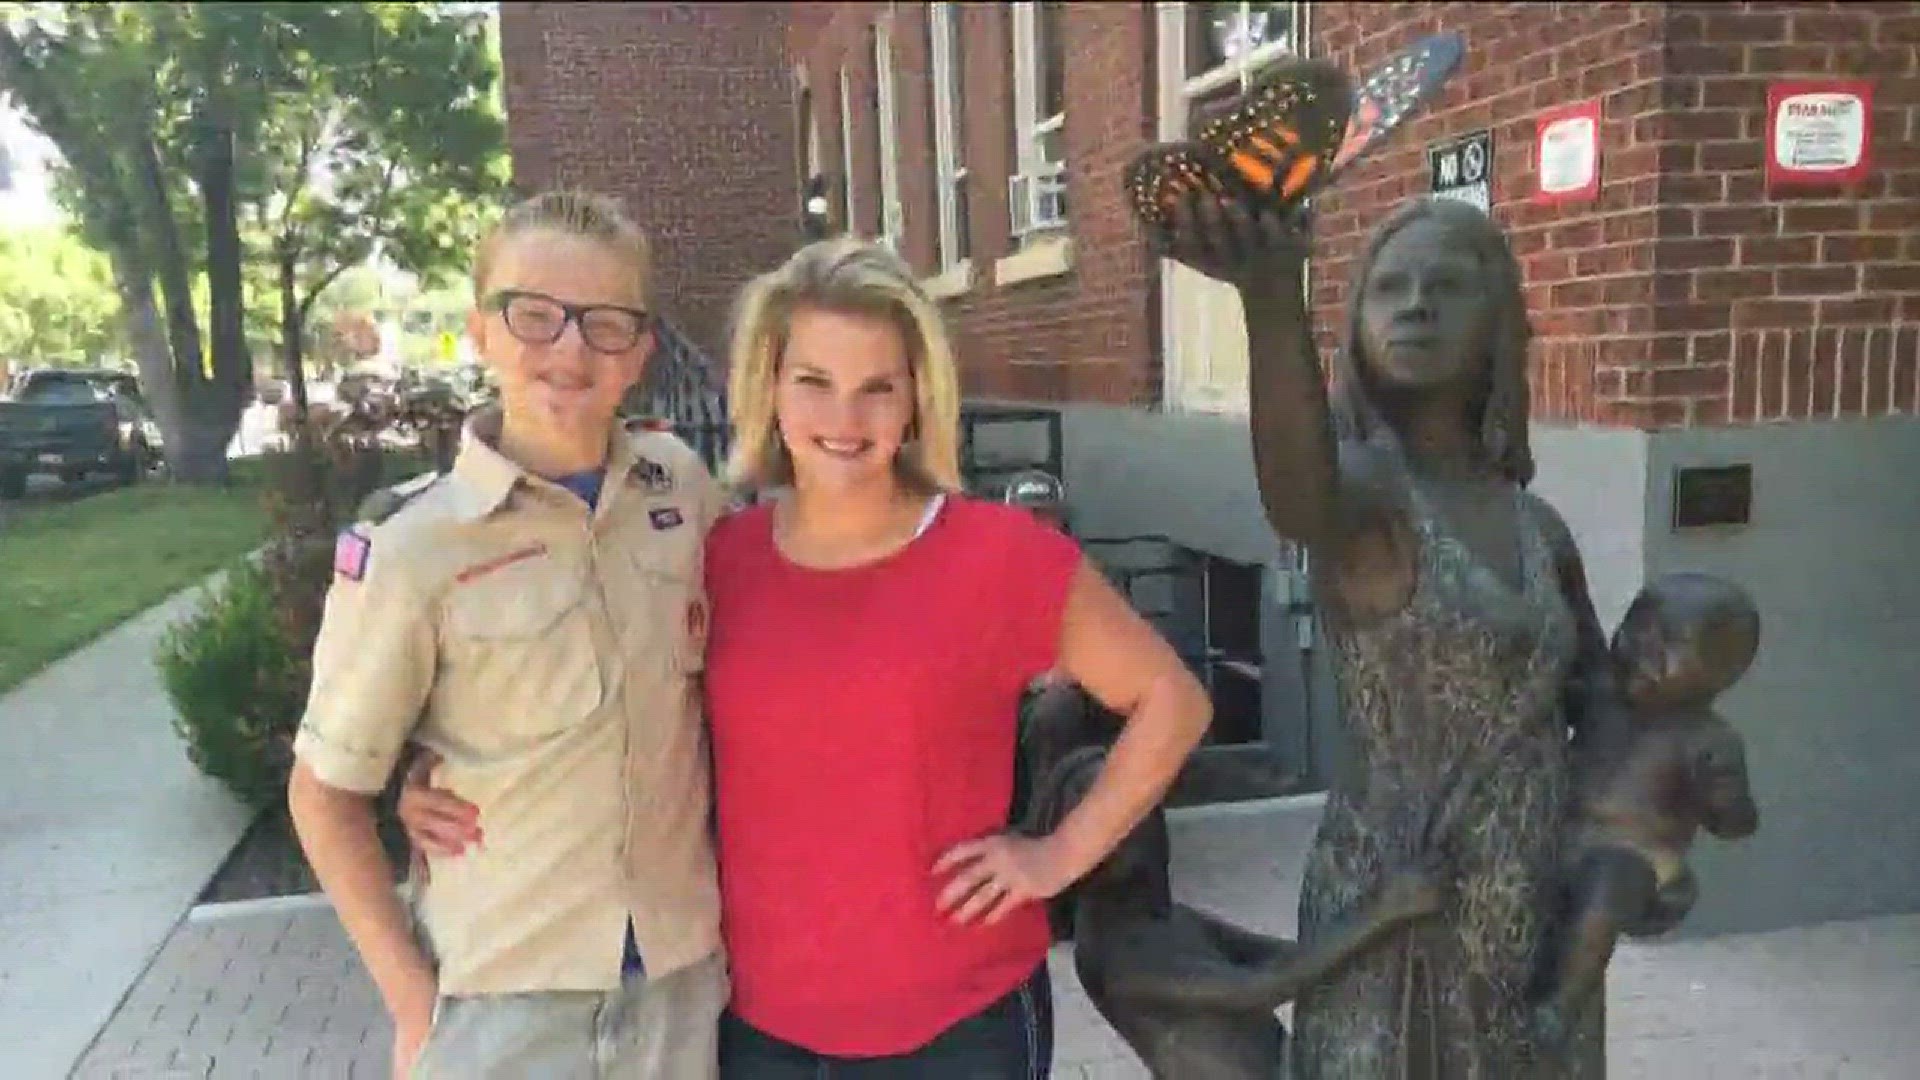 14 year old Tanner Stimpson came up with a unique way to earn his Eagle Scout rank, and the Women's and Children's Alliance is reaping the benefits from it.